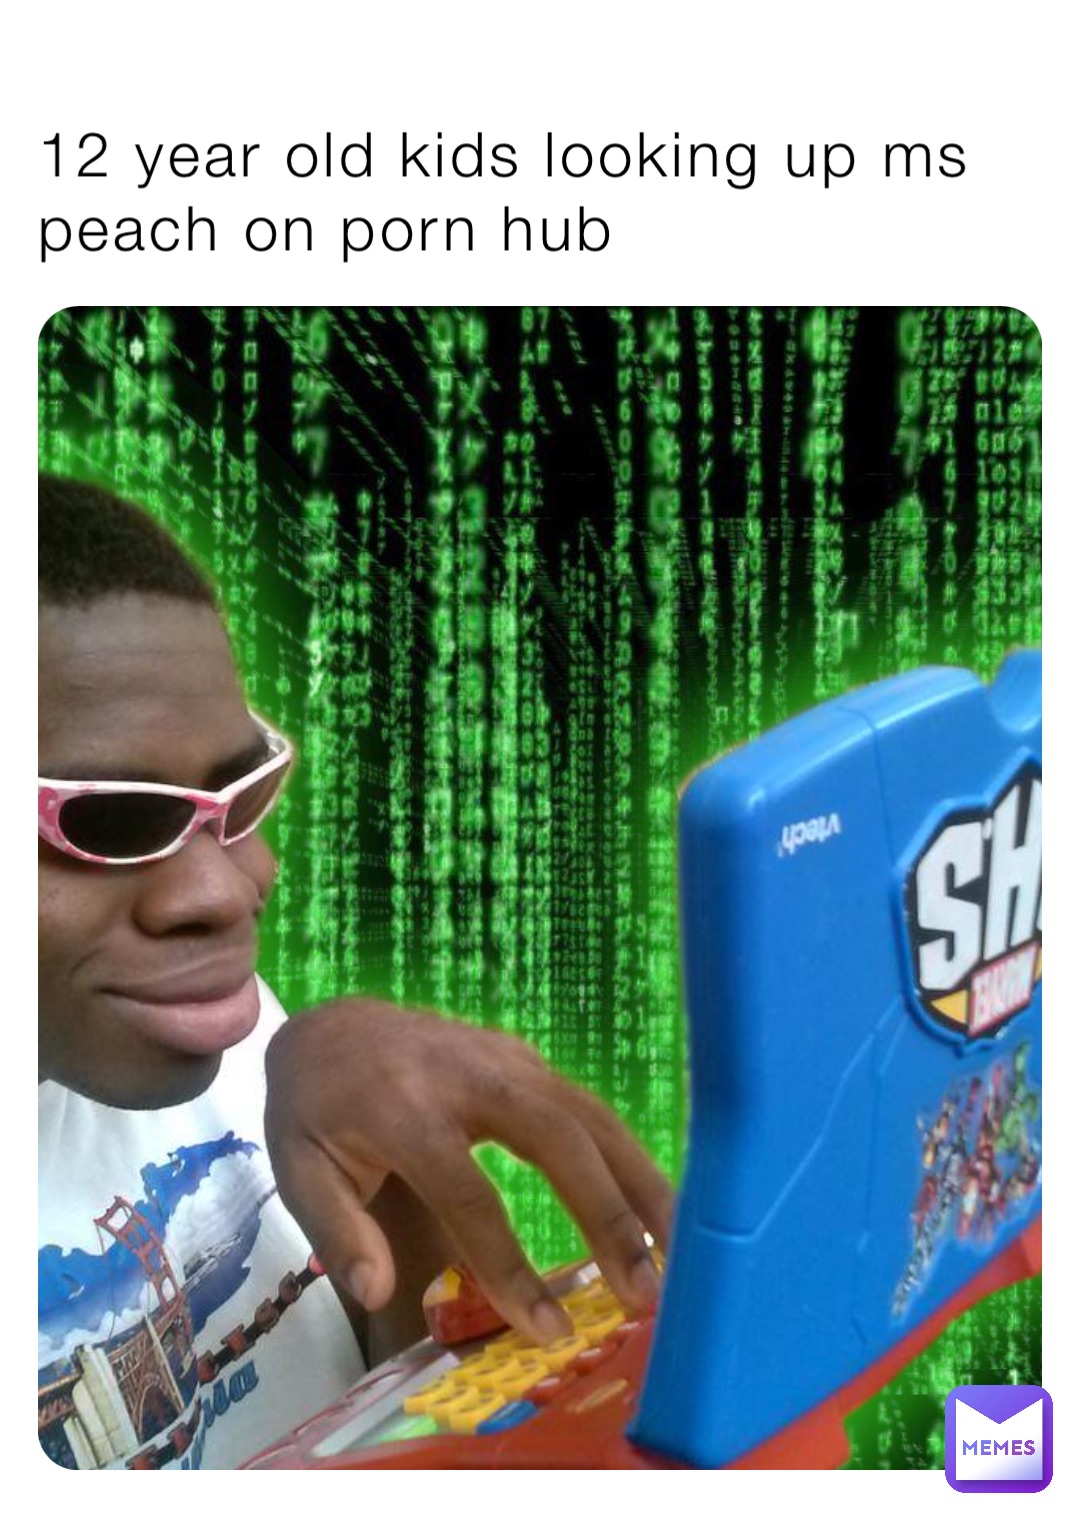 12 year old kids looking up ms peach on porn hub